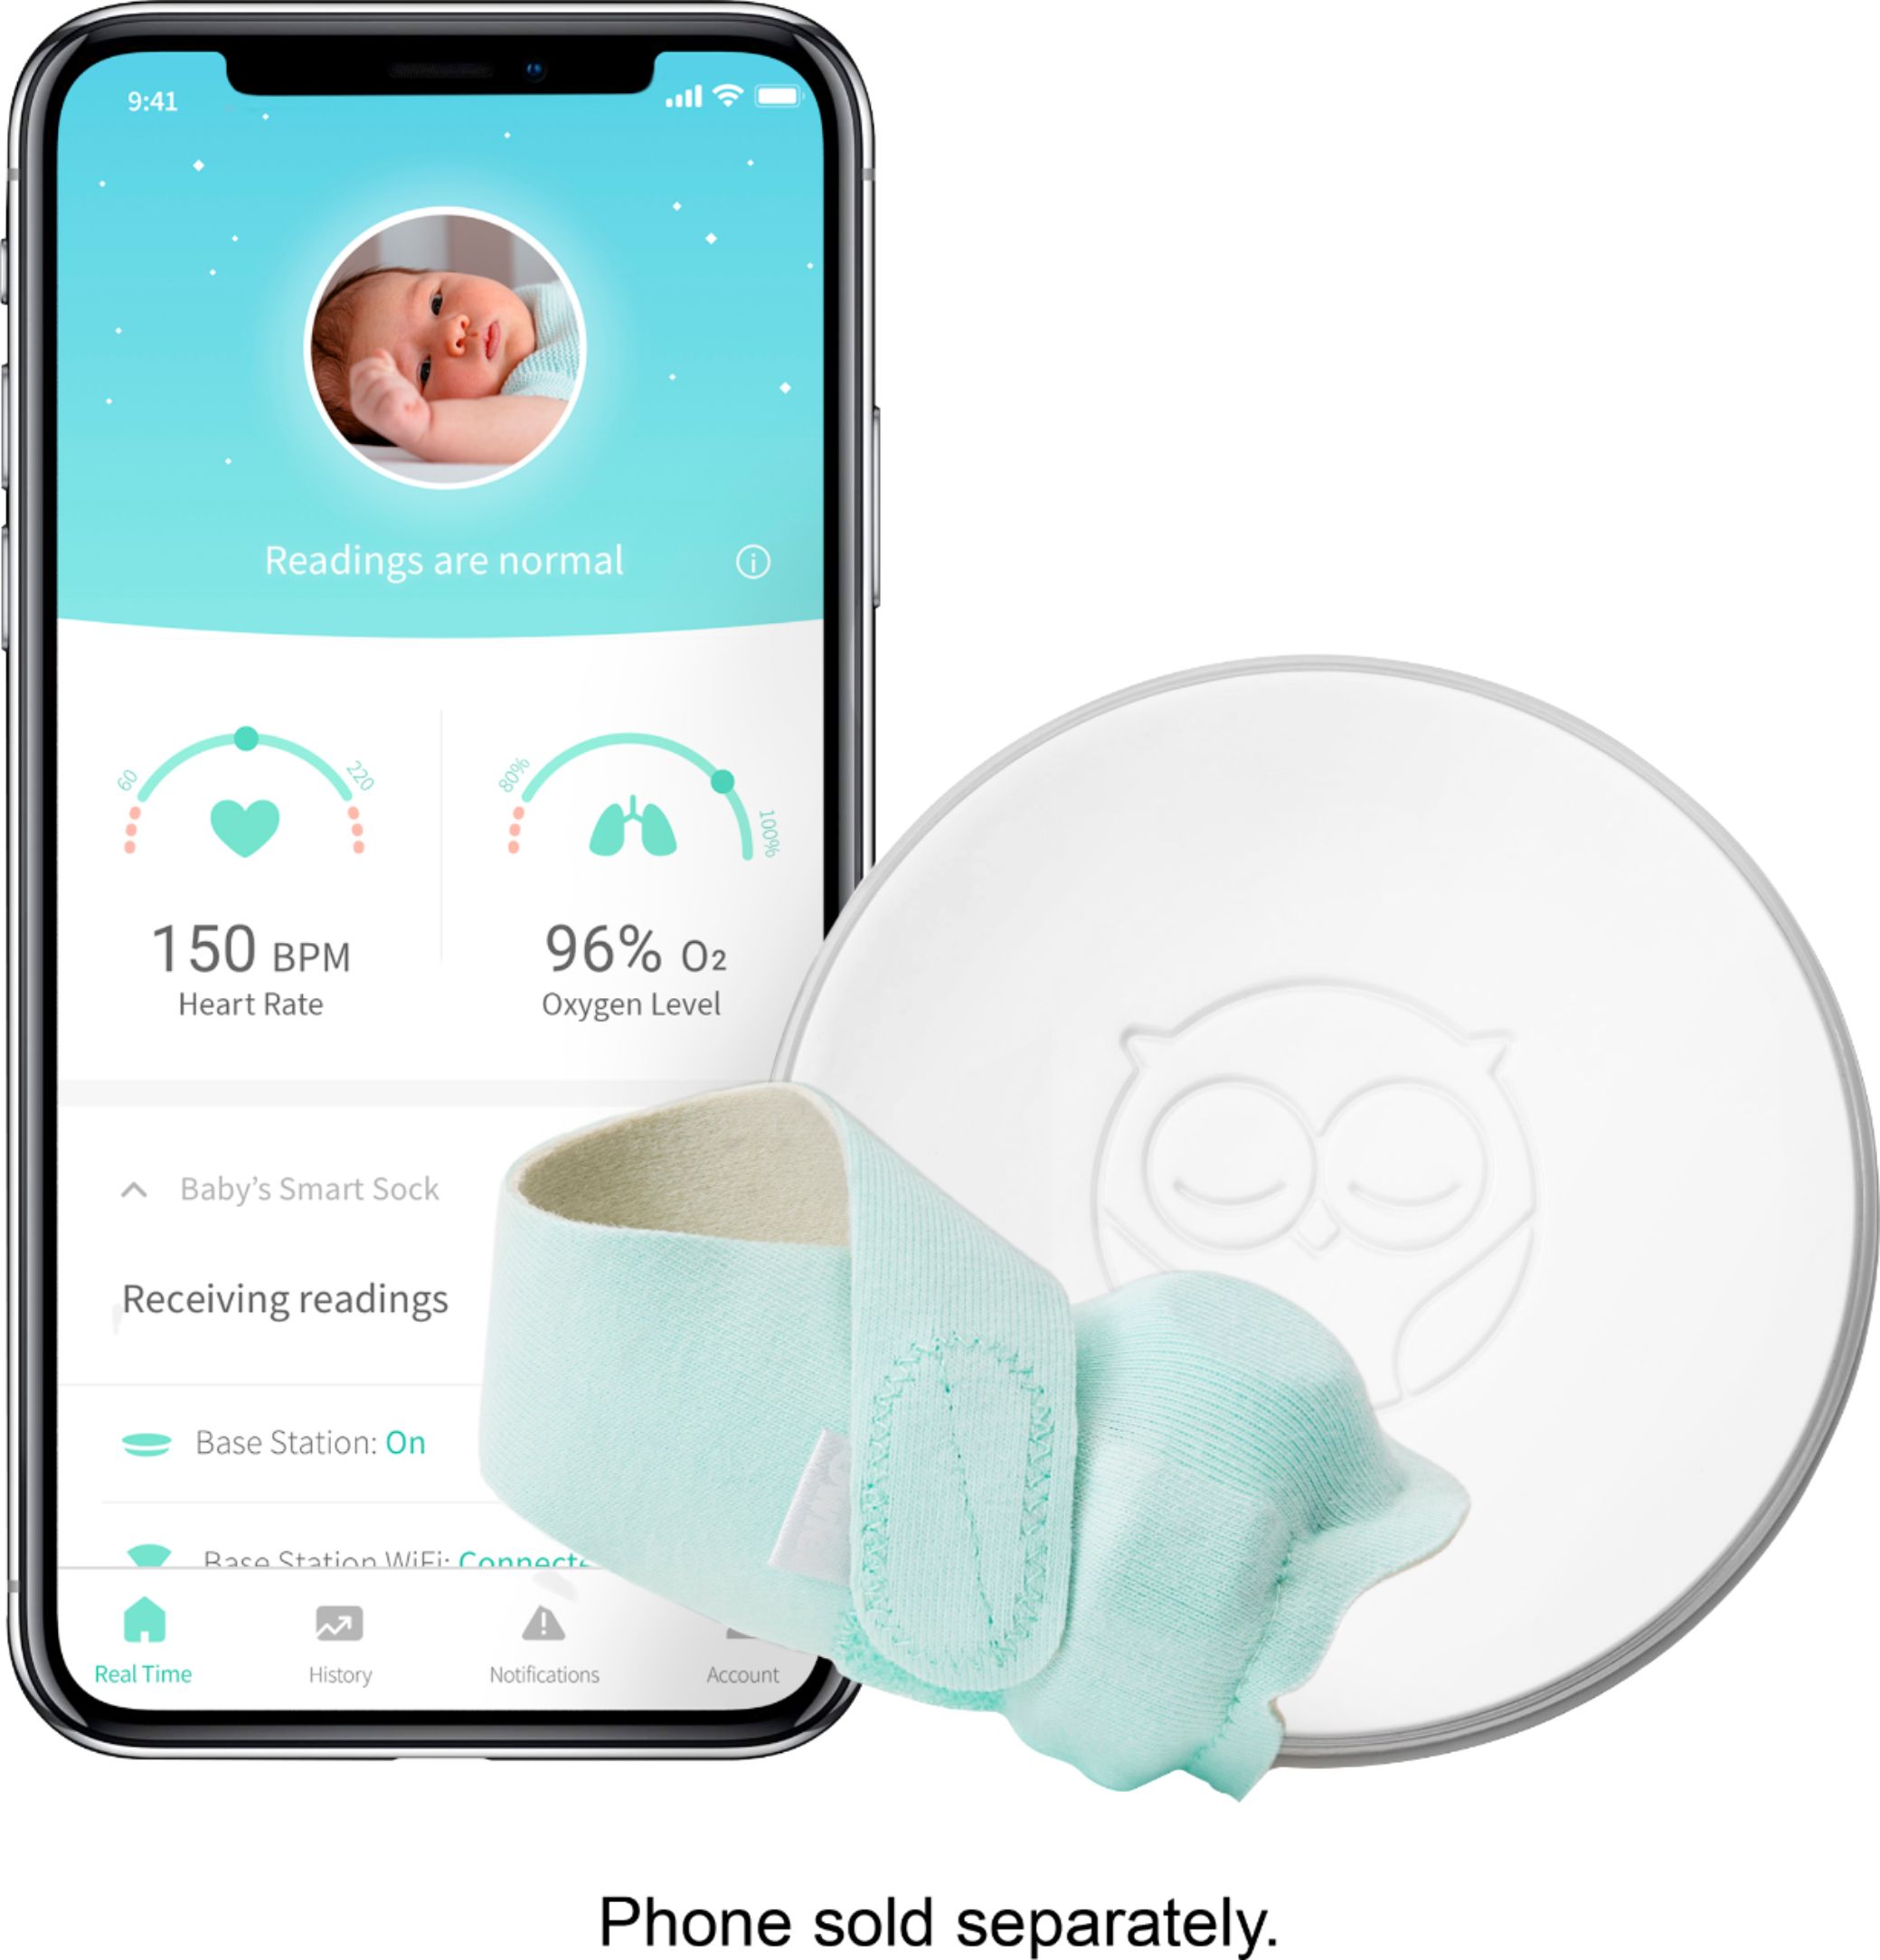 baby heart rate monitor app